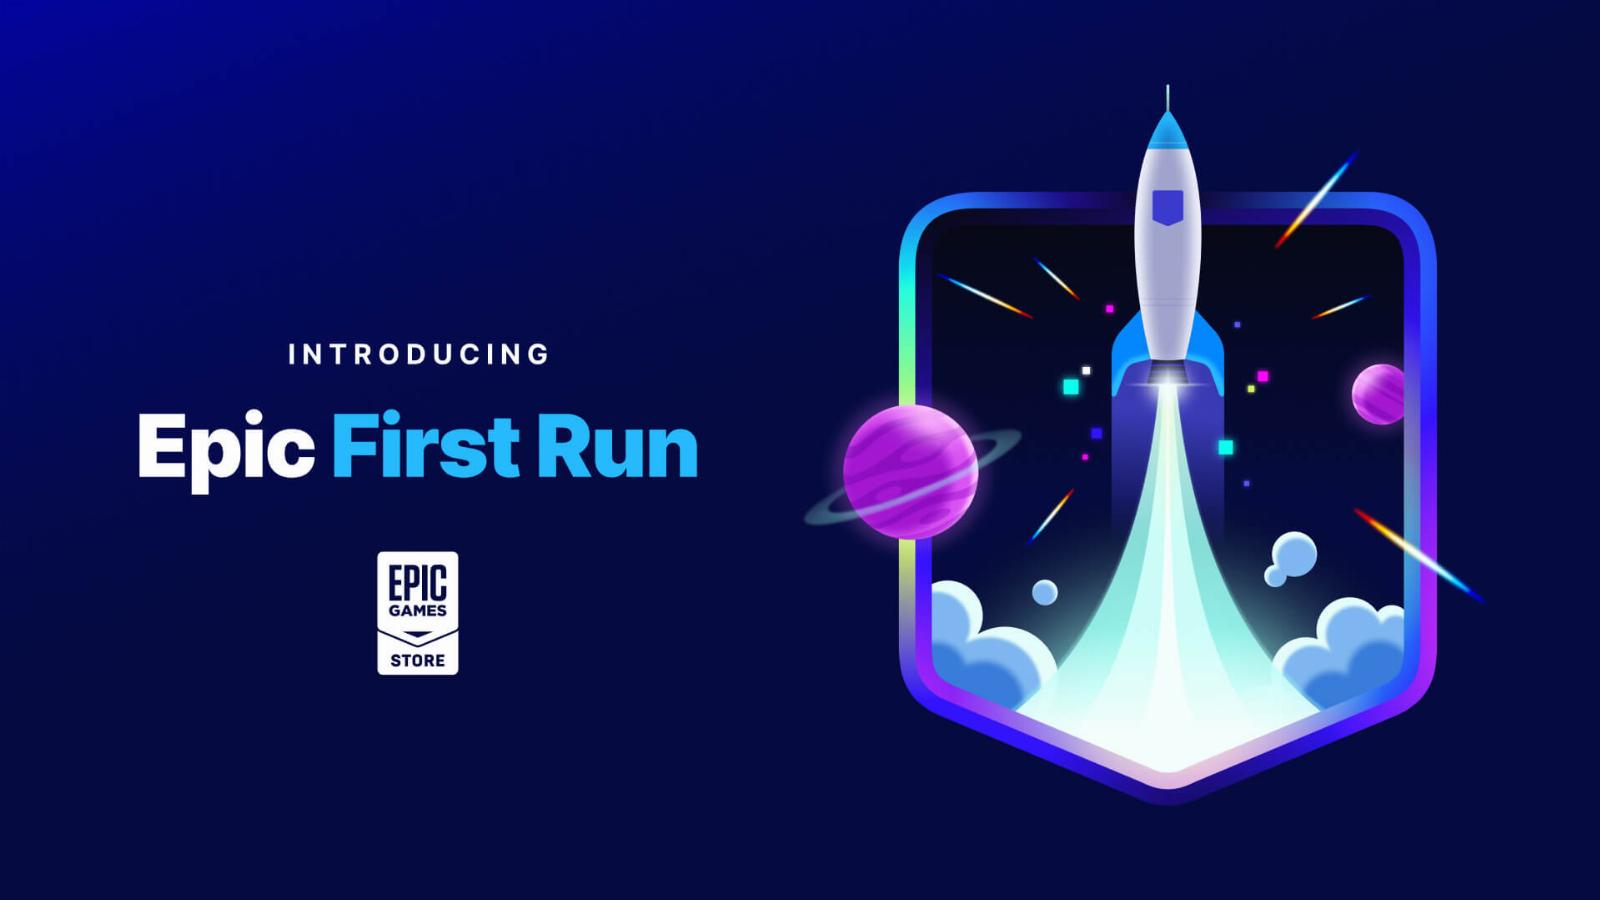 Epic’s First Run offers 100% revenue share to game devs in exchange for exclusivity